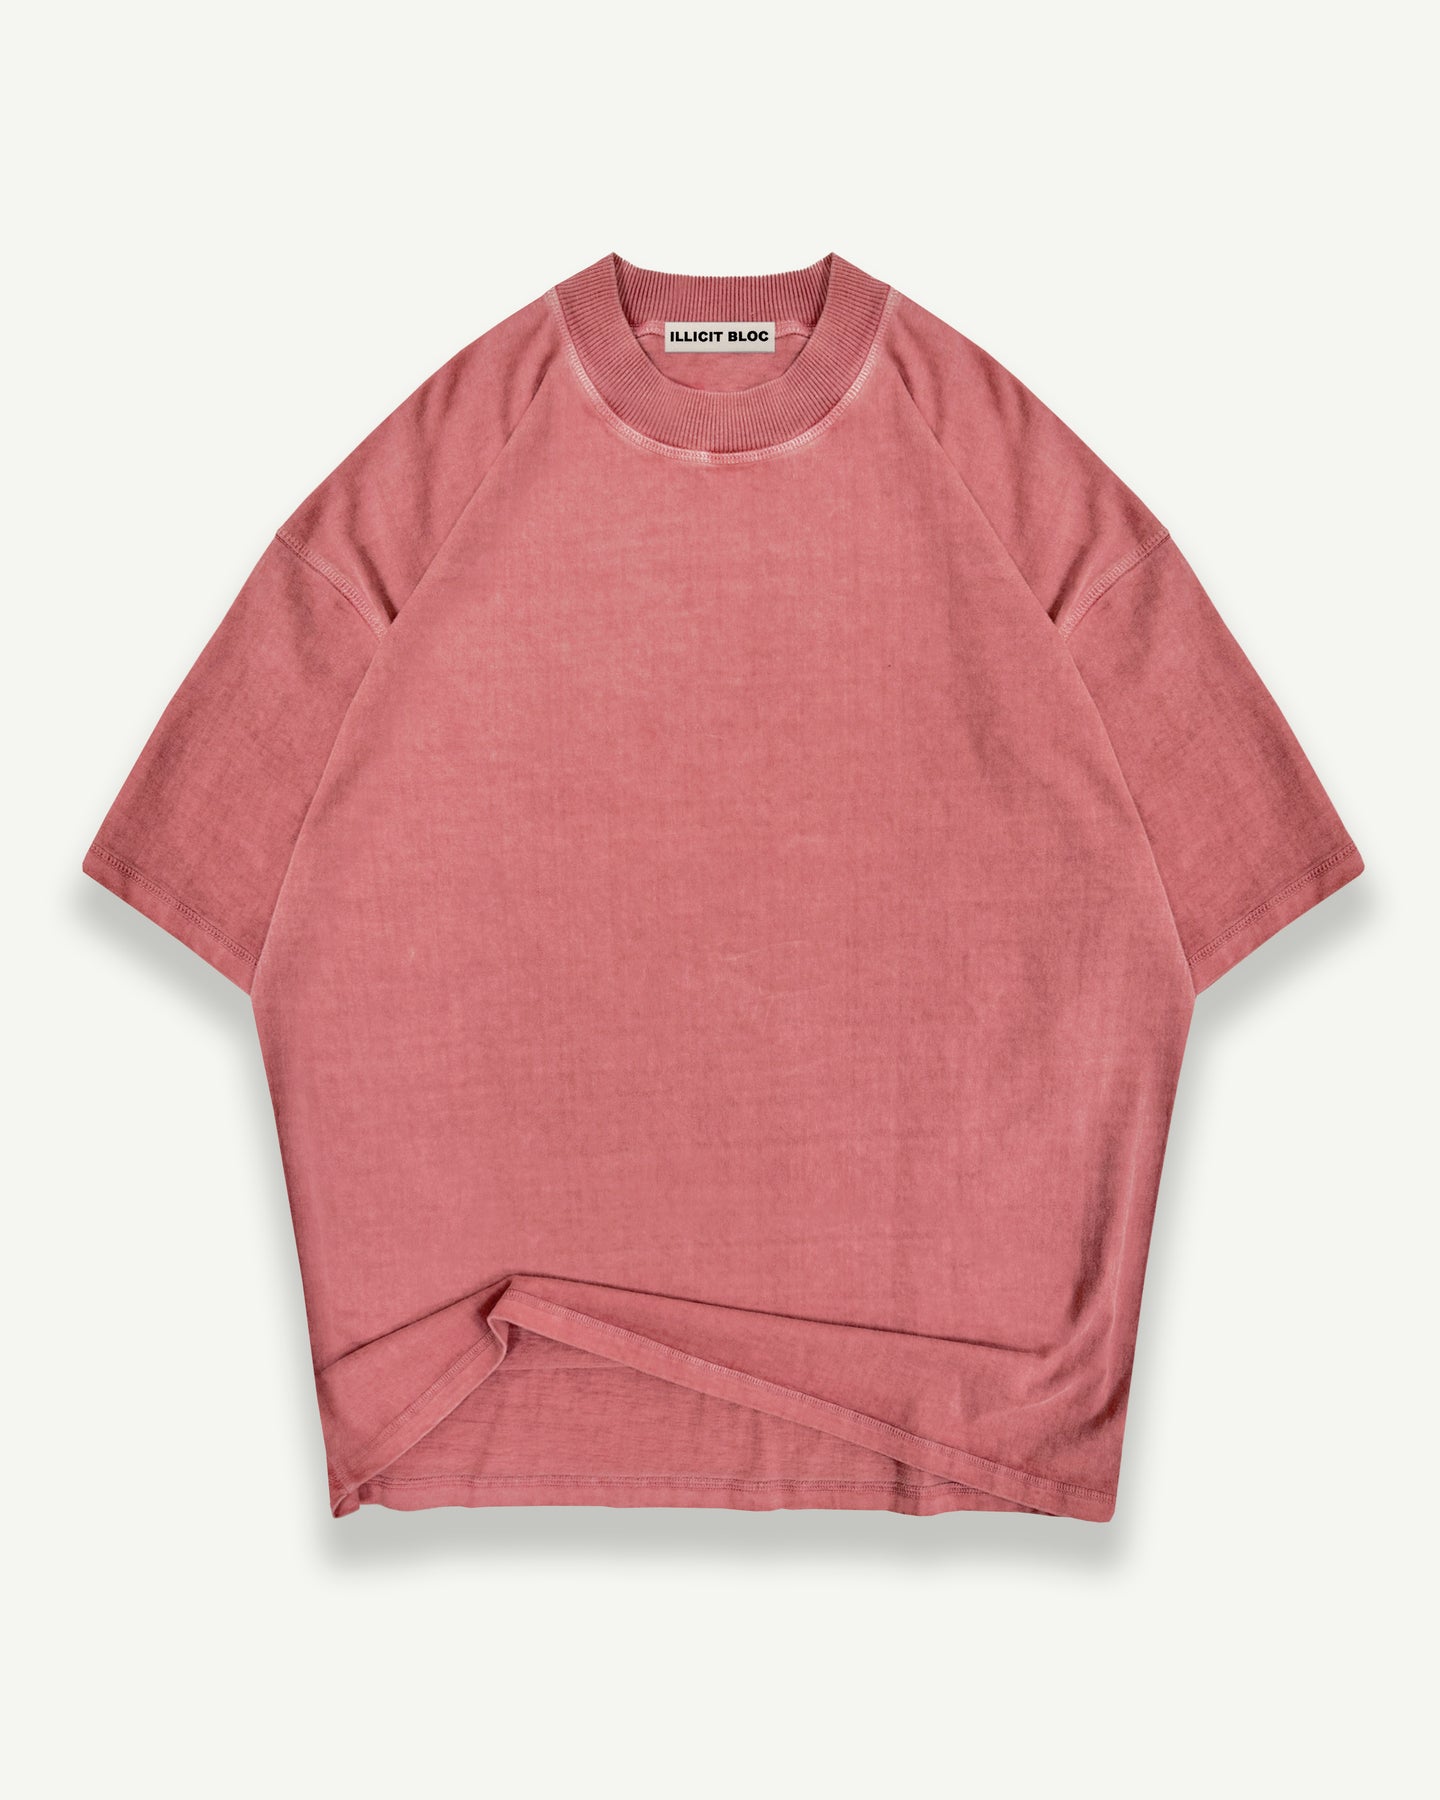 BLANK T-SHIRT - WASHED RED